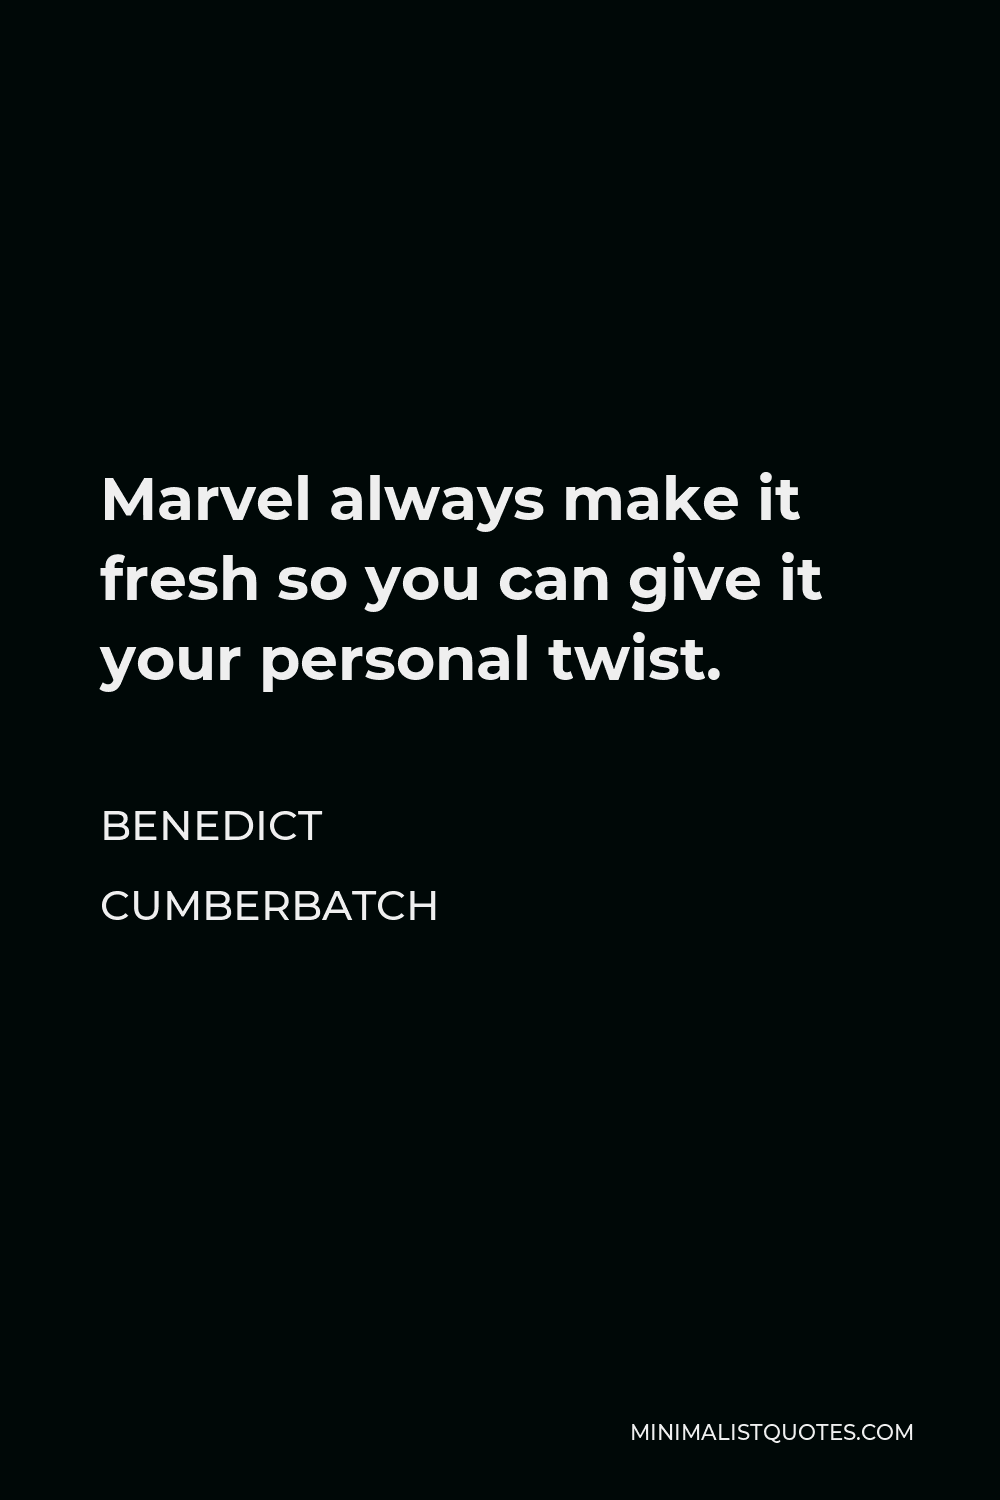 Benedict Cumberbatch Quote - Marvel always make it fresh so you can give it your personal twist.